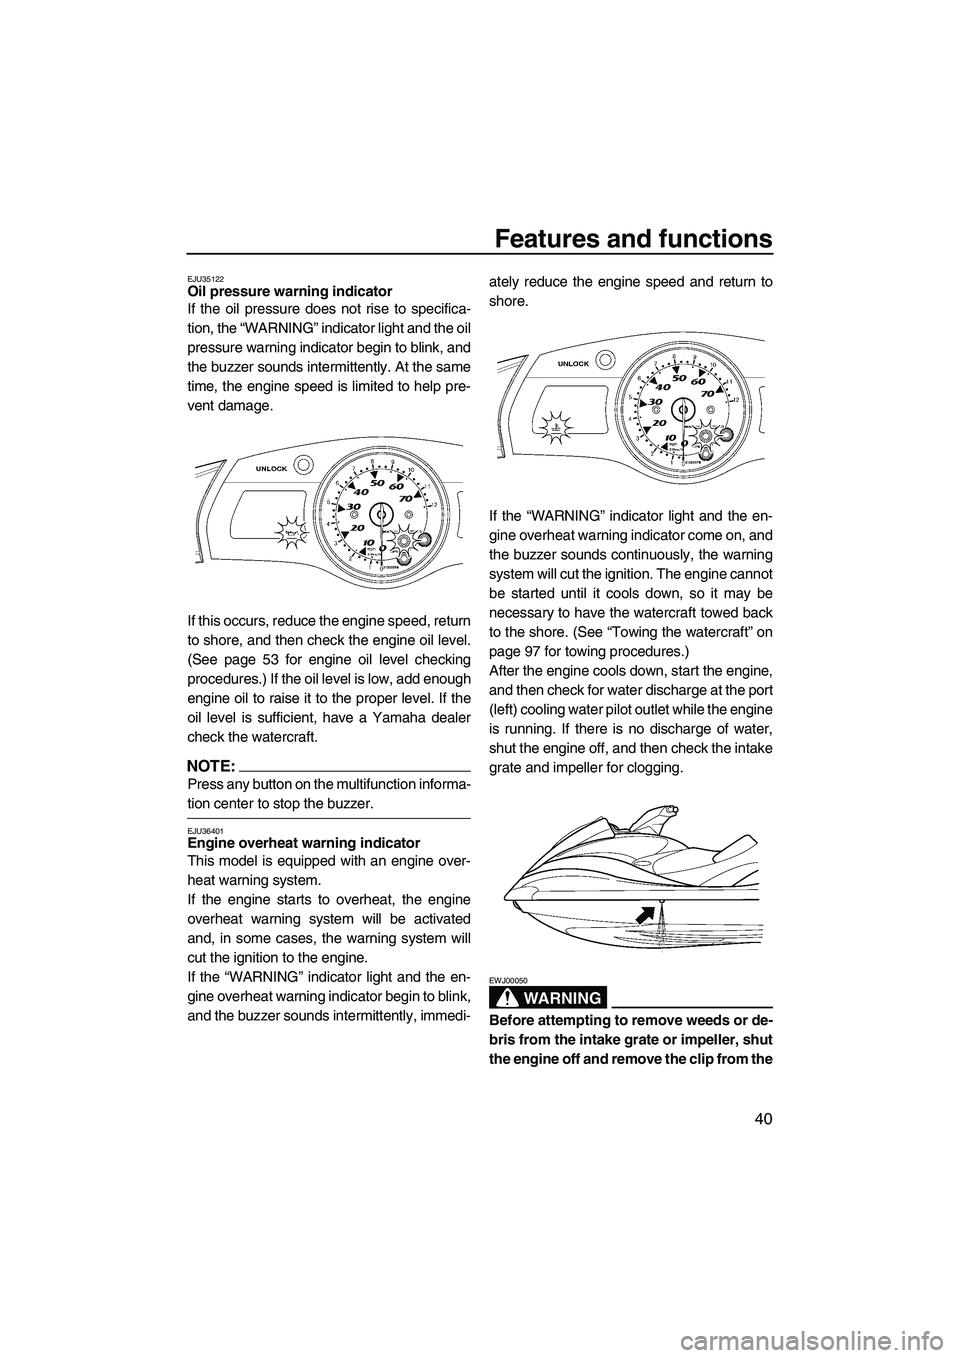 YAMAHA FX HO 2007  Owners Manual Features and functions
40
EJU35122Oil pressure warning indicator 
If the oil pressure does not rise to specifica-
tion, the “WARNING” indicator light and the oil
pressure warning indicator begin t